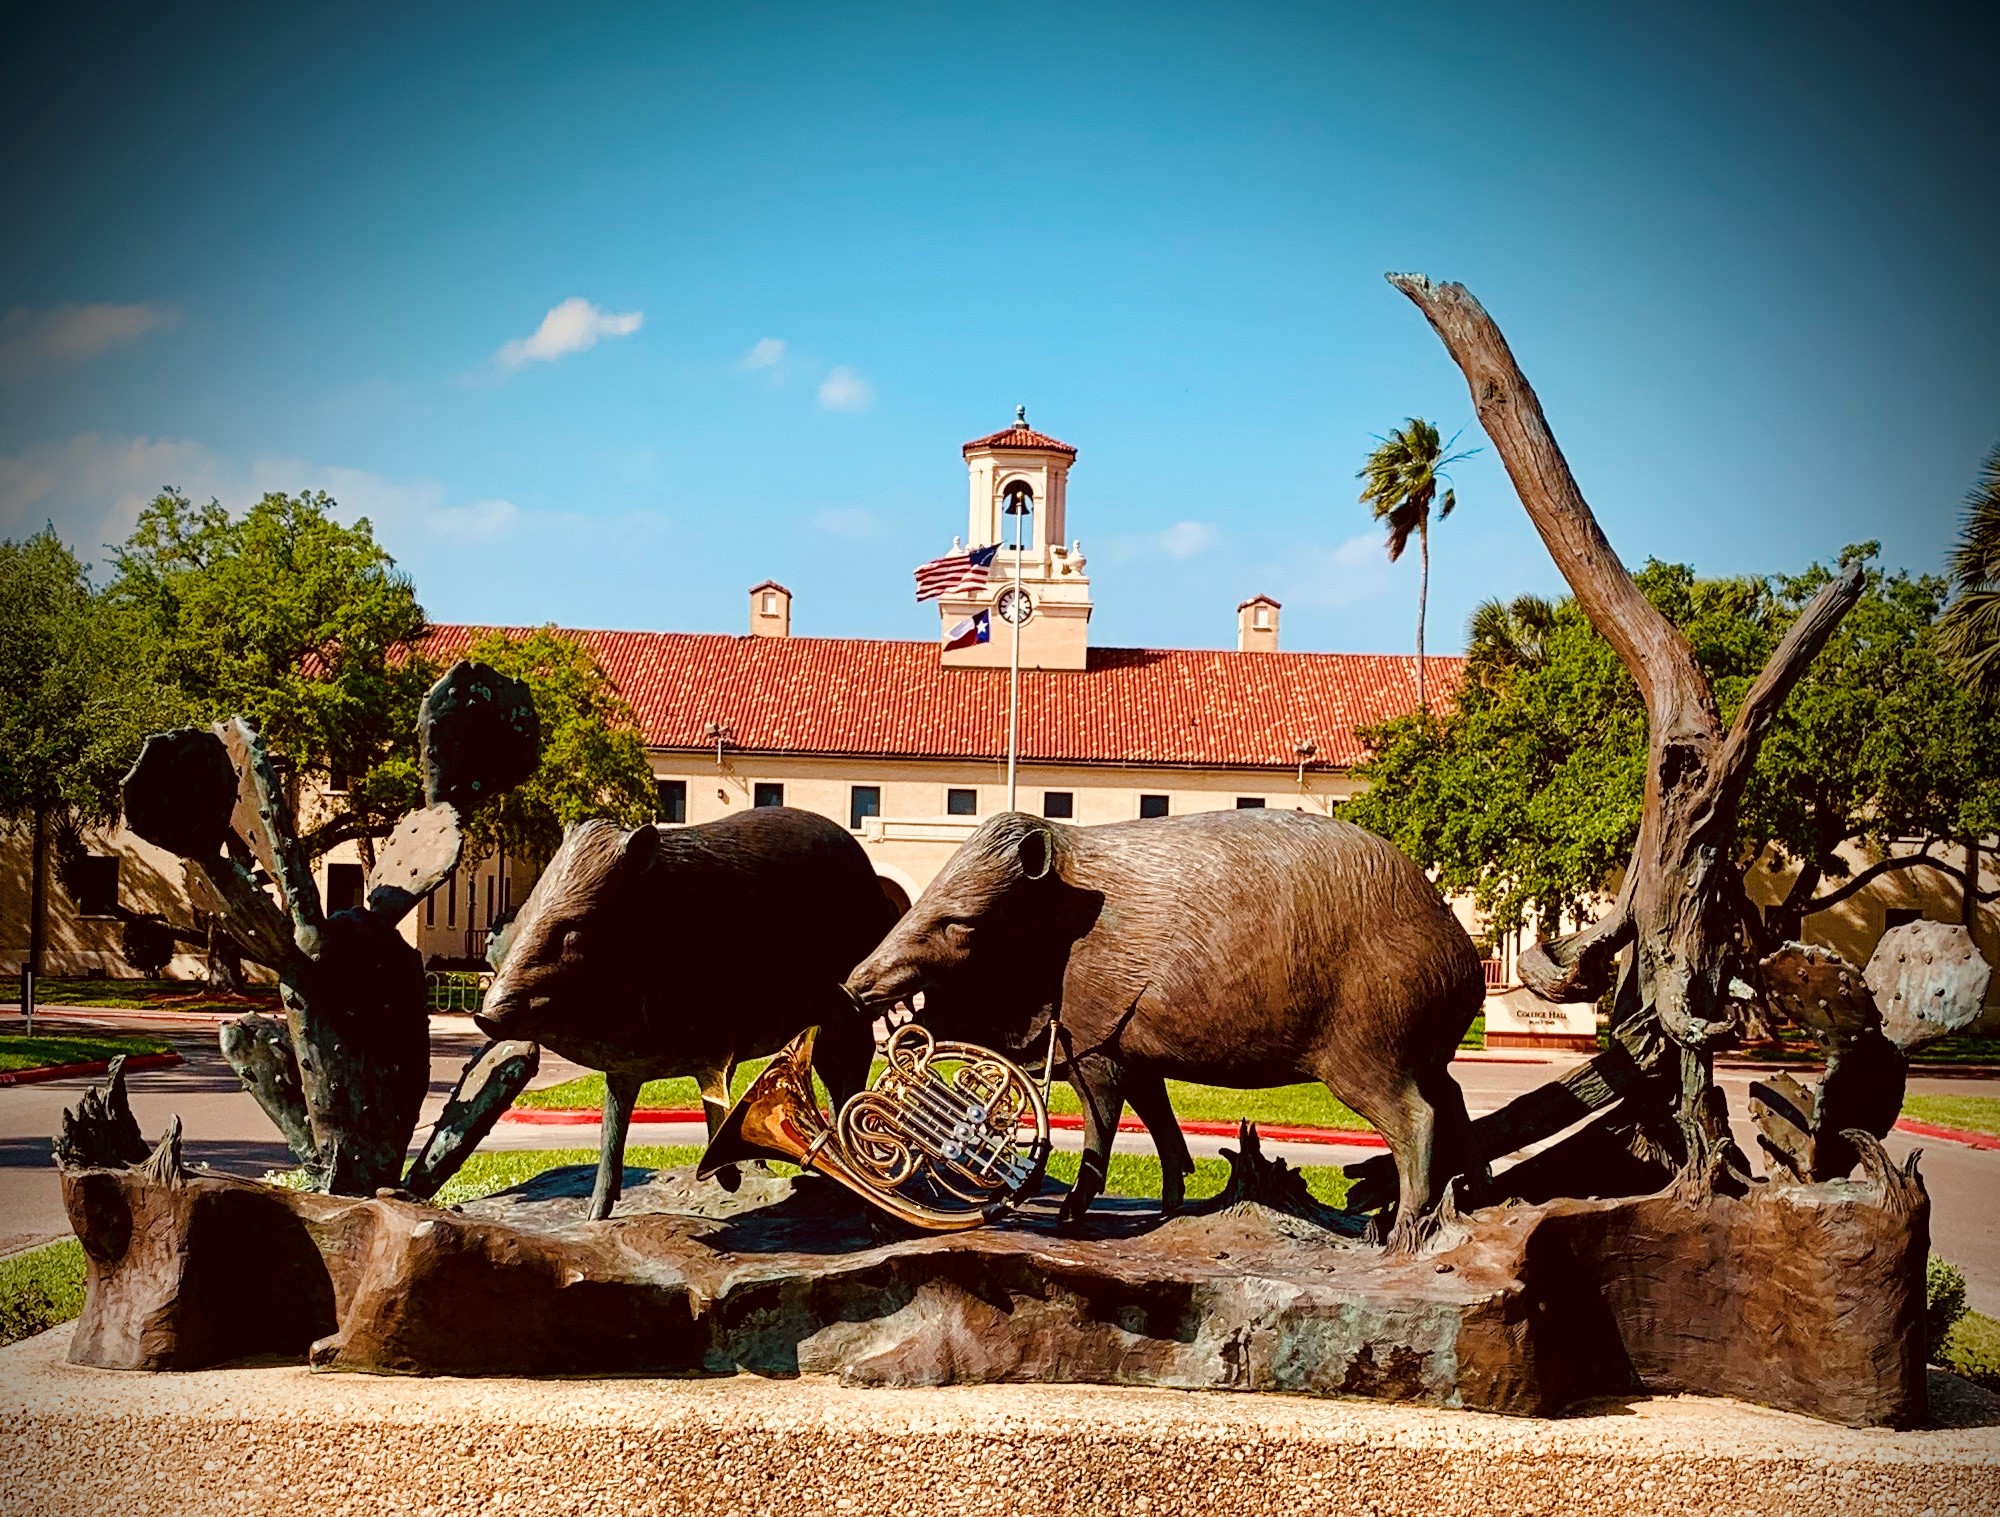 javelina statues with a french horn